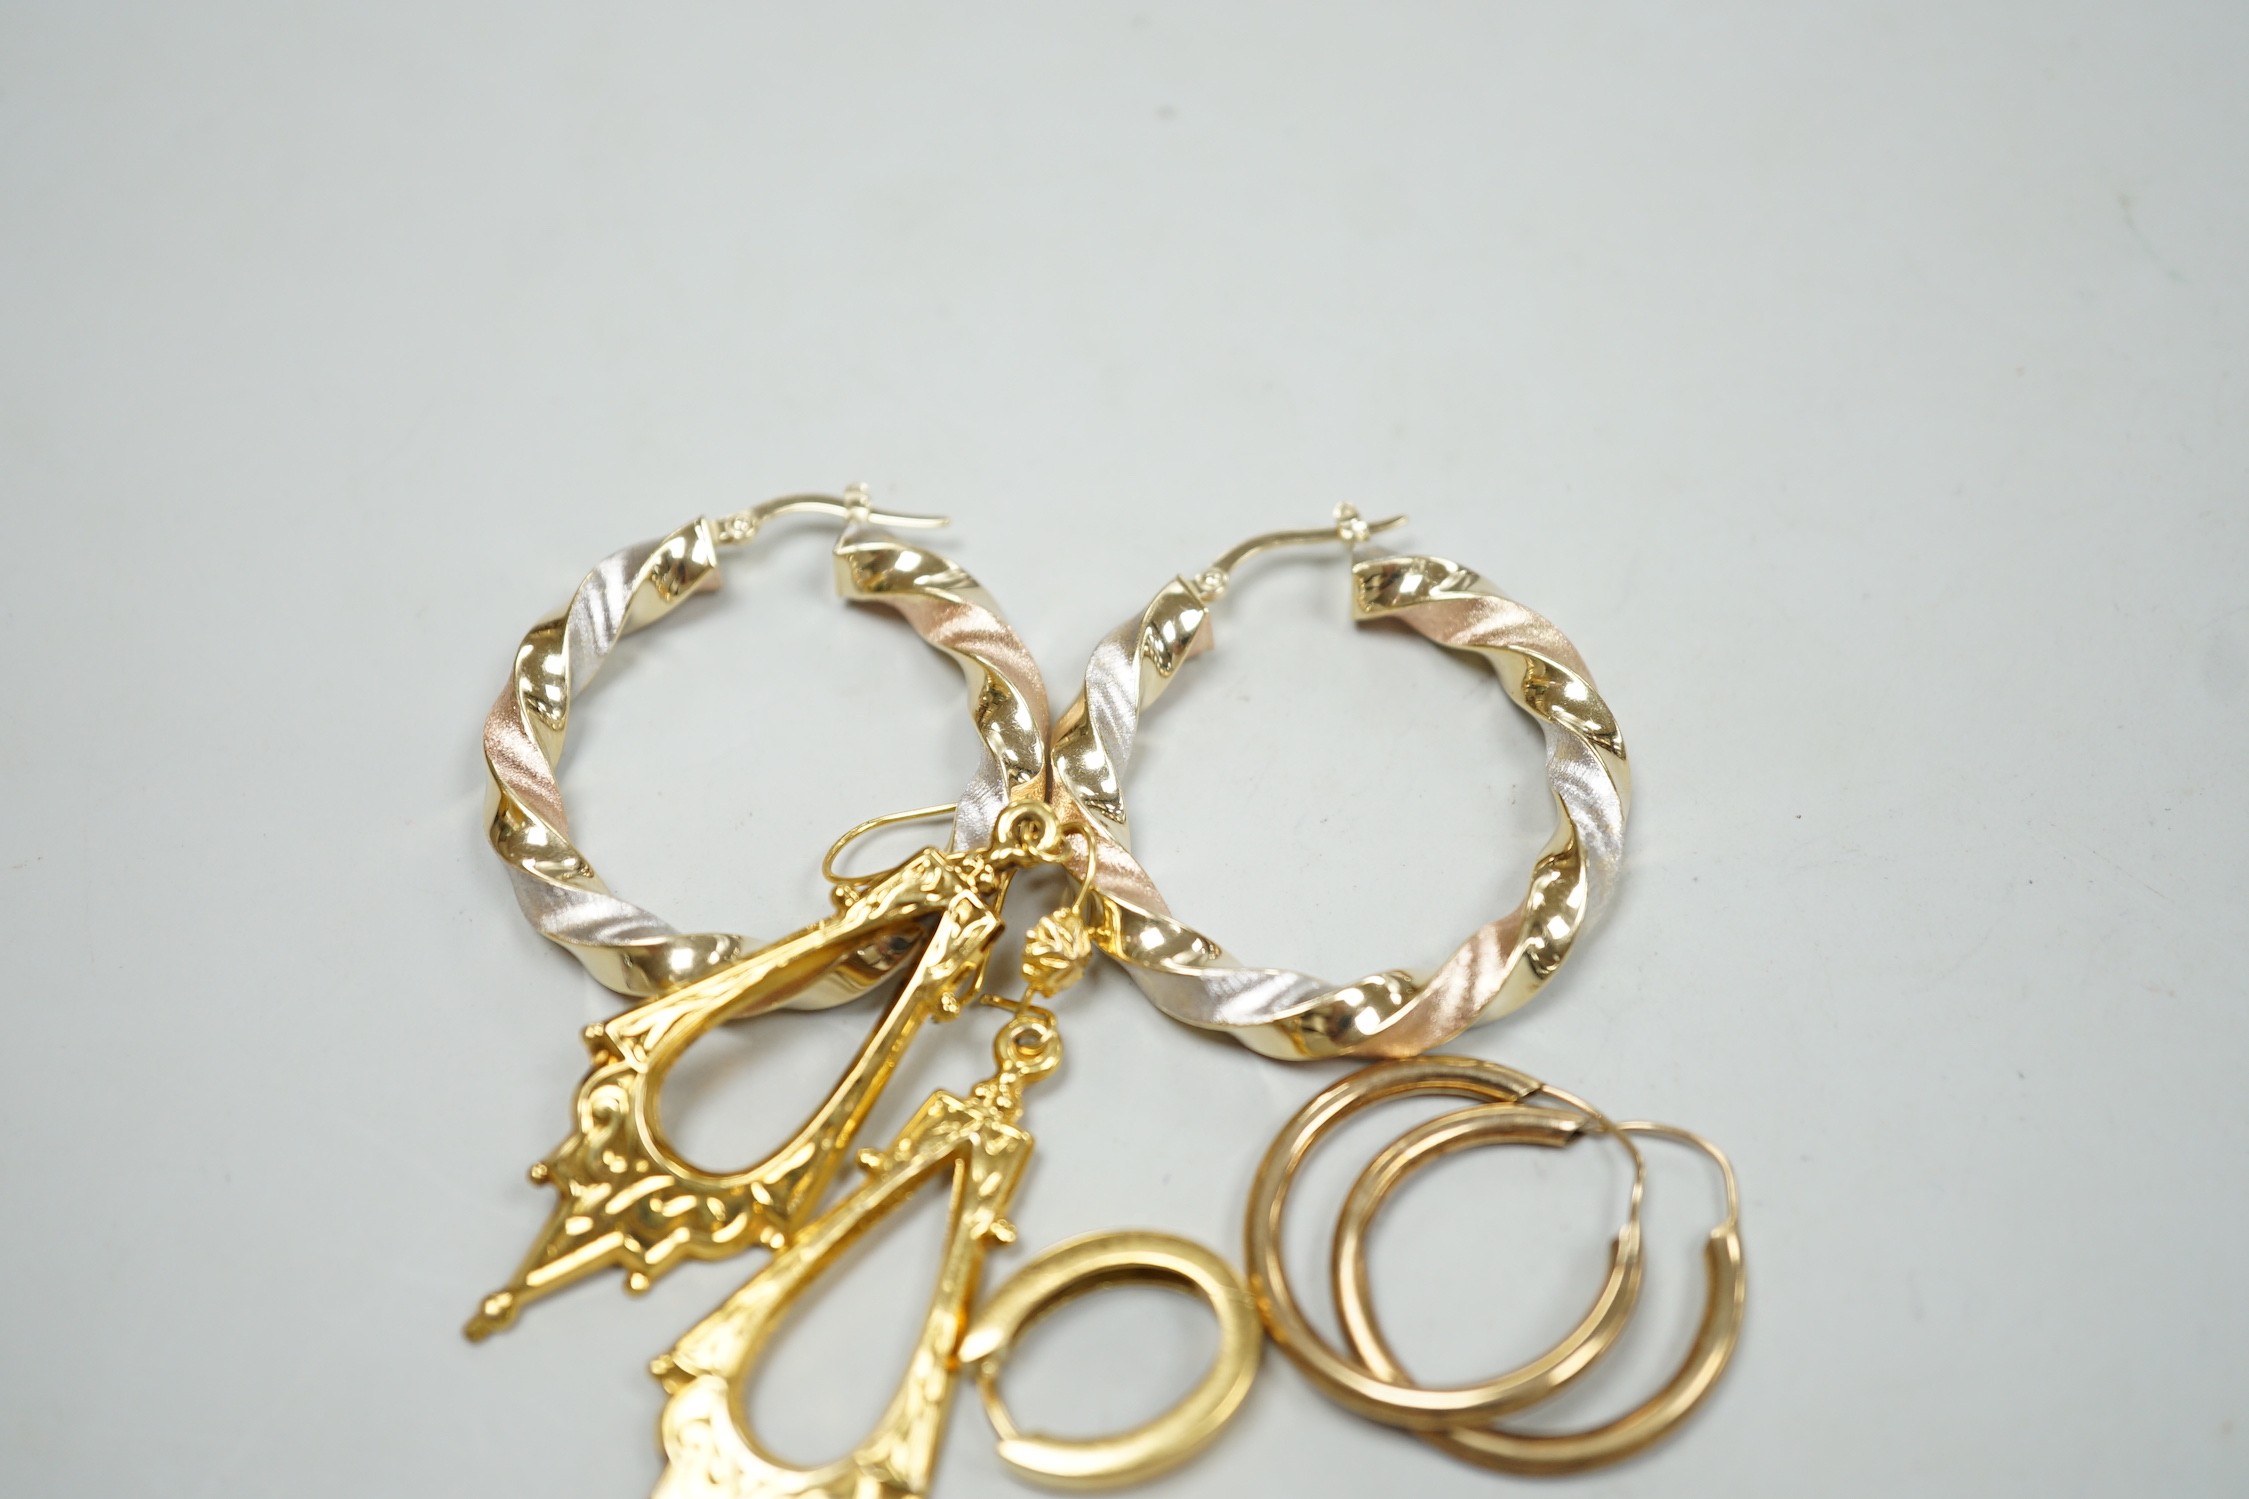 A modern pair of Italian three colour 14k hoop earrings, 35mm, 5.9 grams, a small pair of 750 oval earrings, 5.4 grams, a pair of 9ct gold Victorian style drop earrings, 2.7 grams and a pair of yellow metal hoop earrings